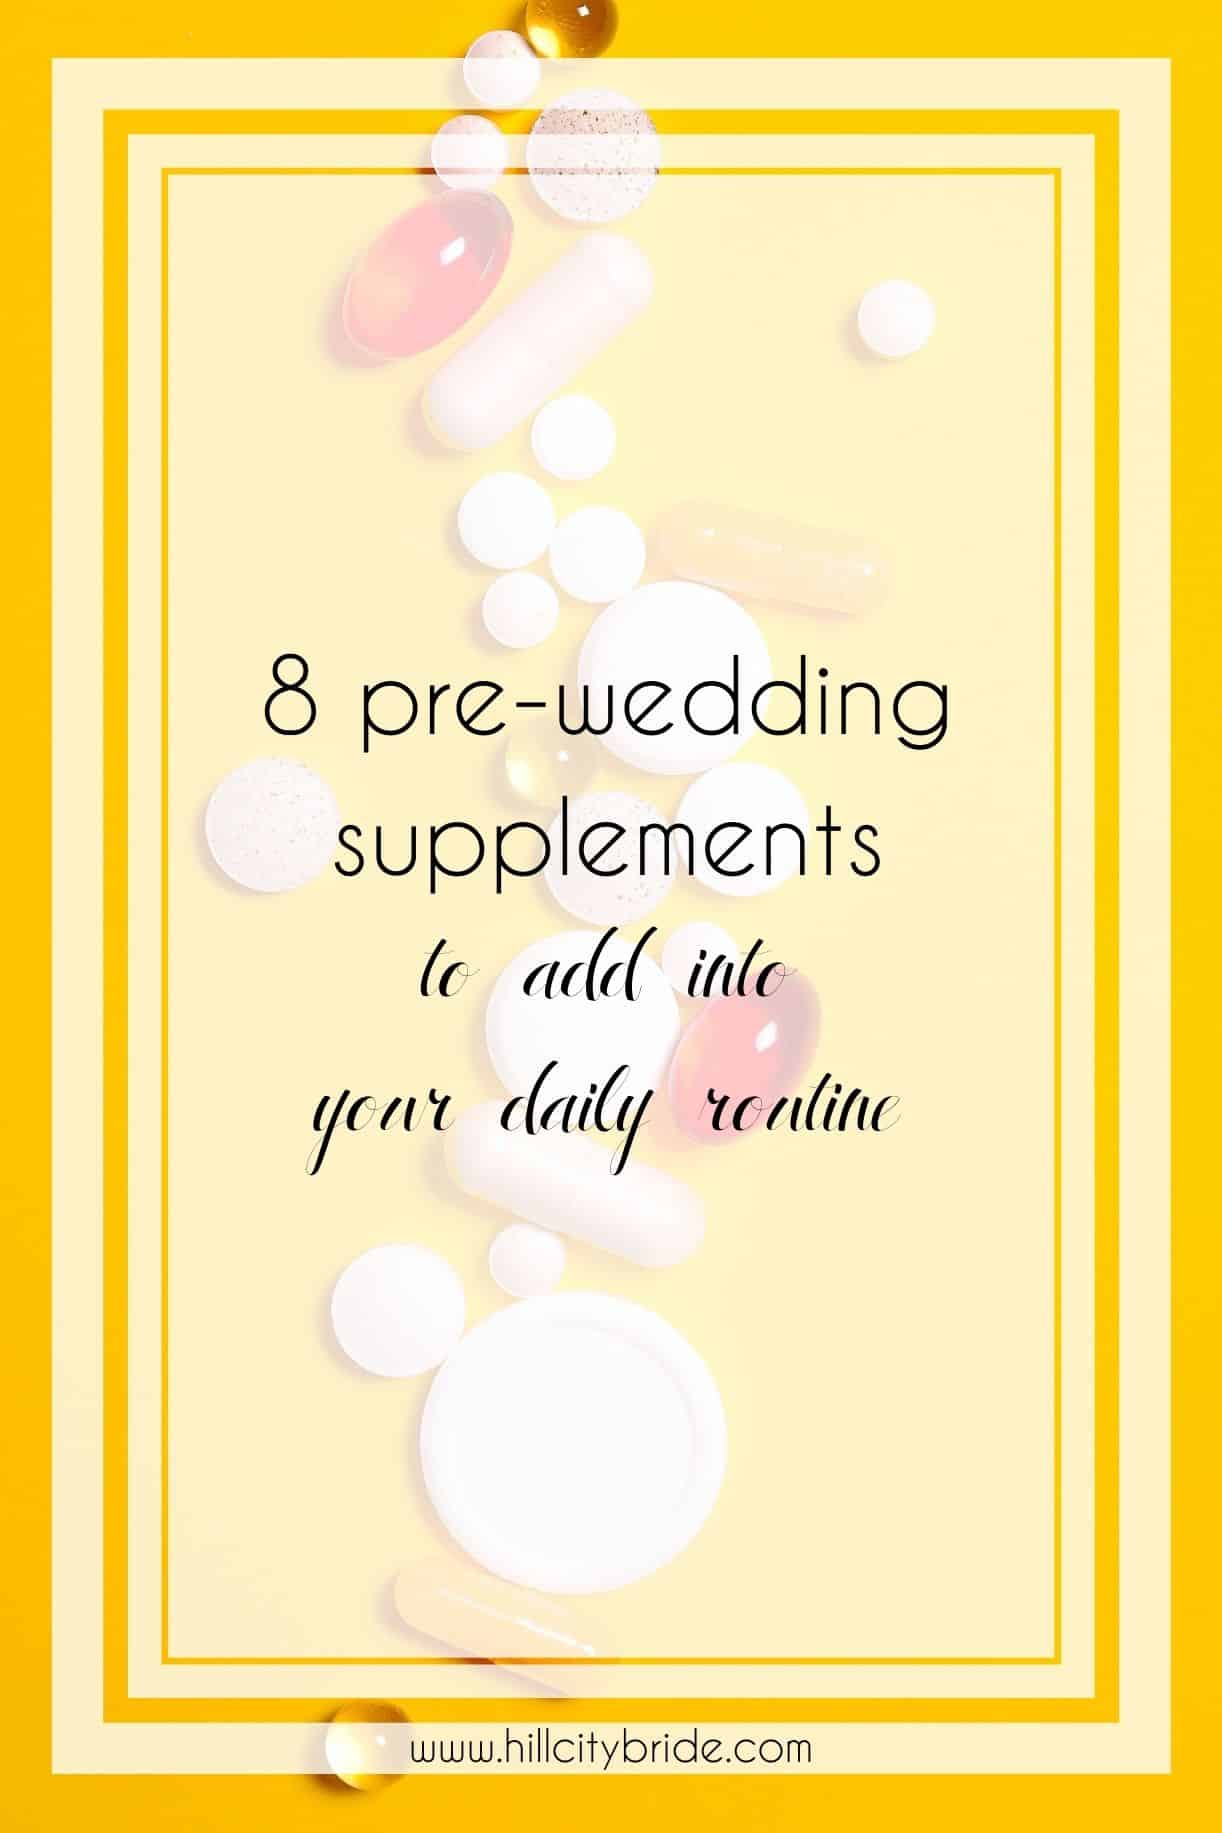 Supplements Females Should Take for Their Wedding